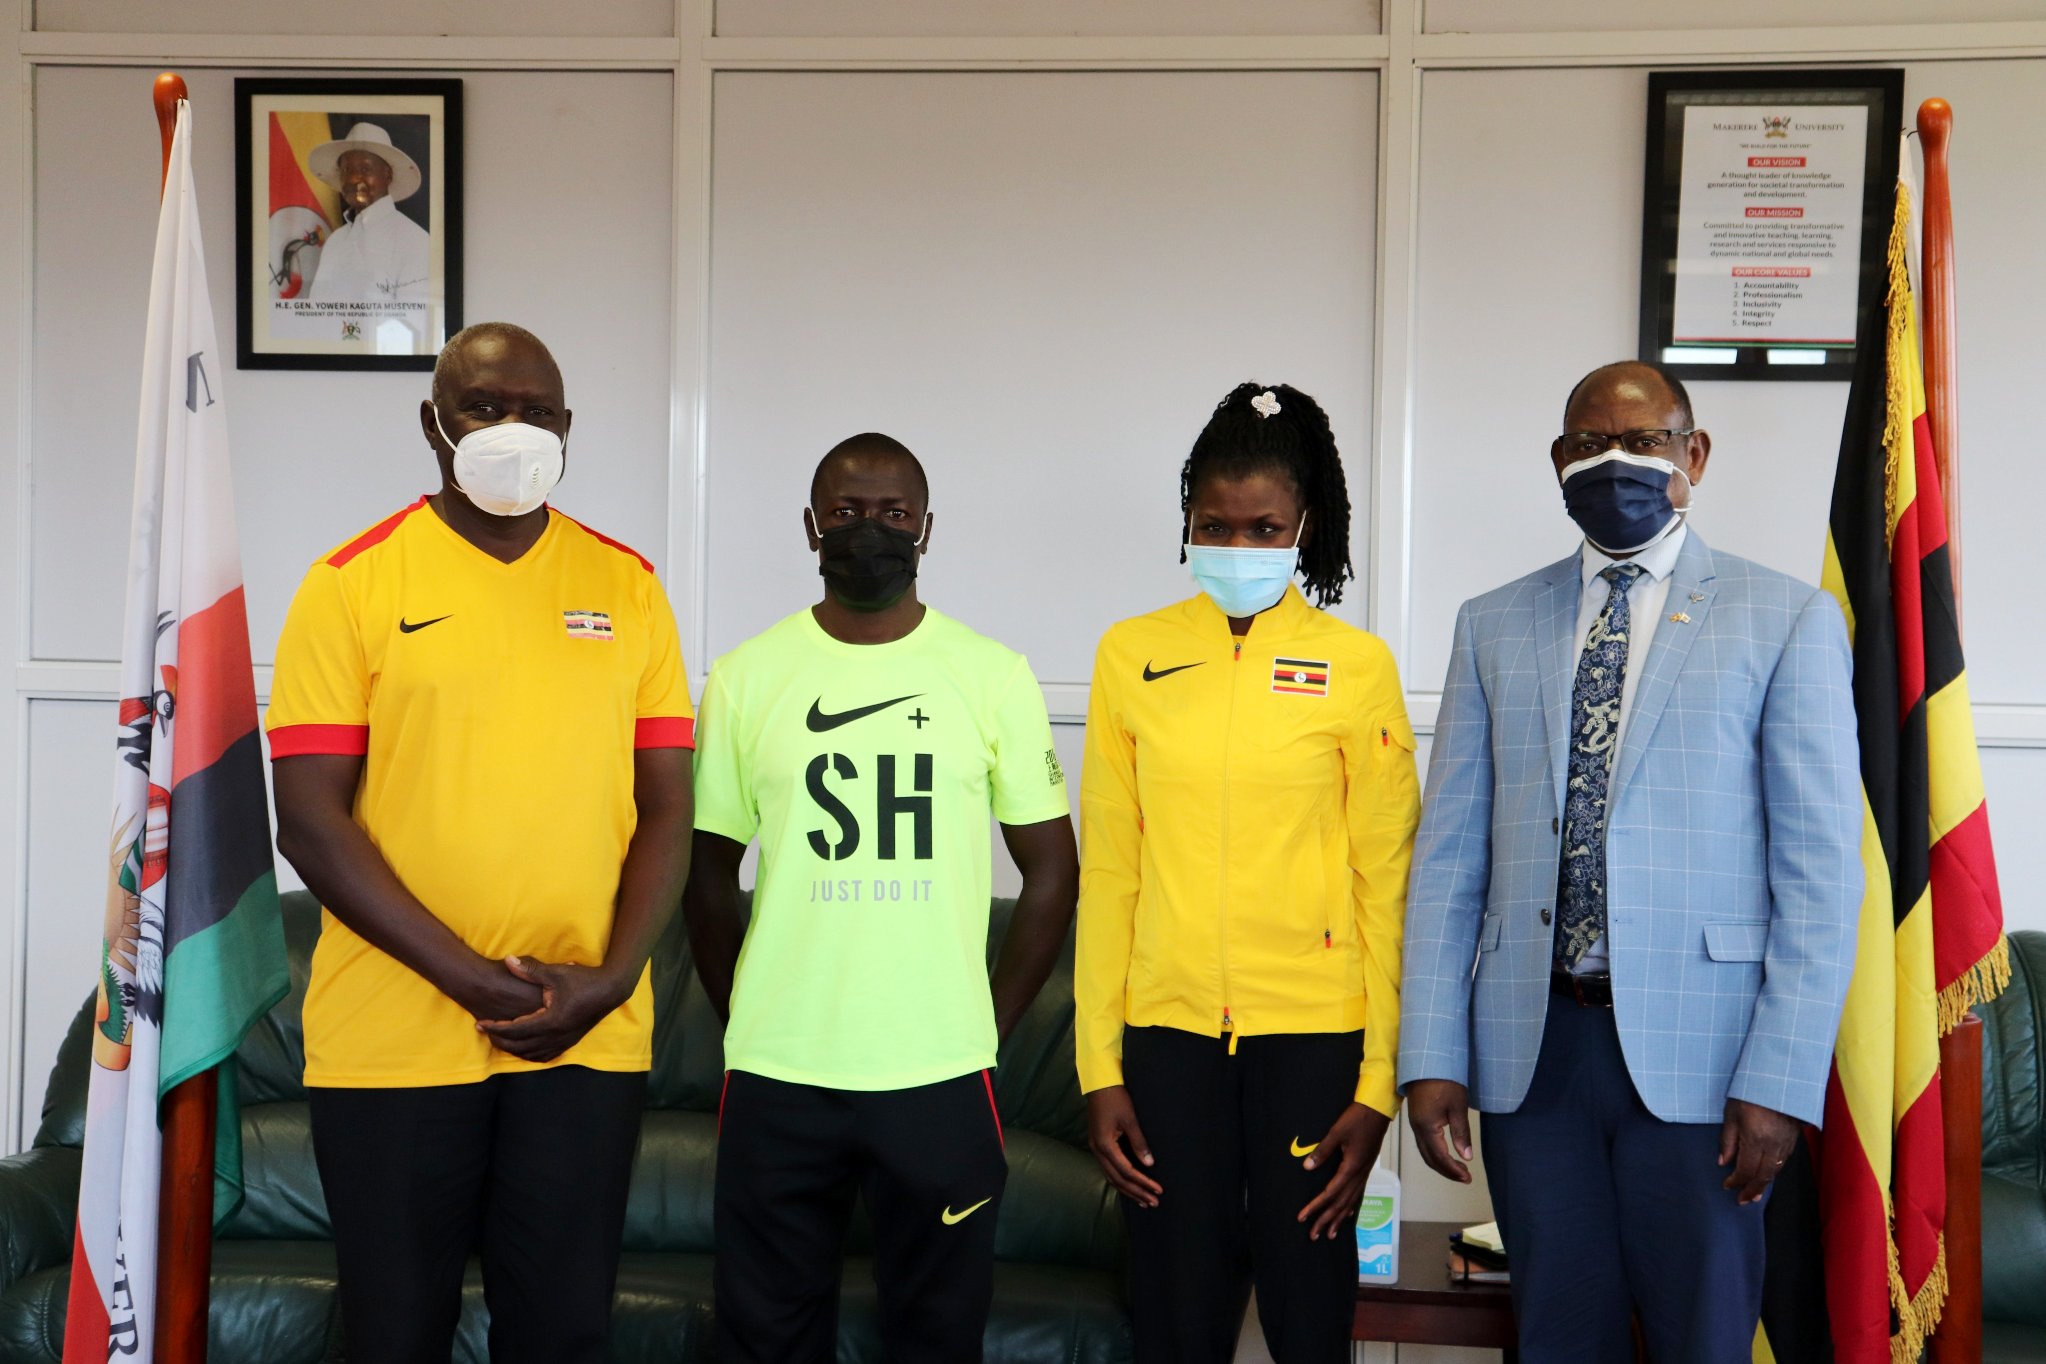 The Vice Chancellor, Prof. Barnabas Nawangwe (R) with Ms. Oroma Peace (2nd R) and members of Team Uganda during the flag-off ceremony to the Tokyo, Japan Paralympics, 19th July 2021, CTF1, Makerere University.